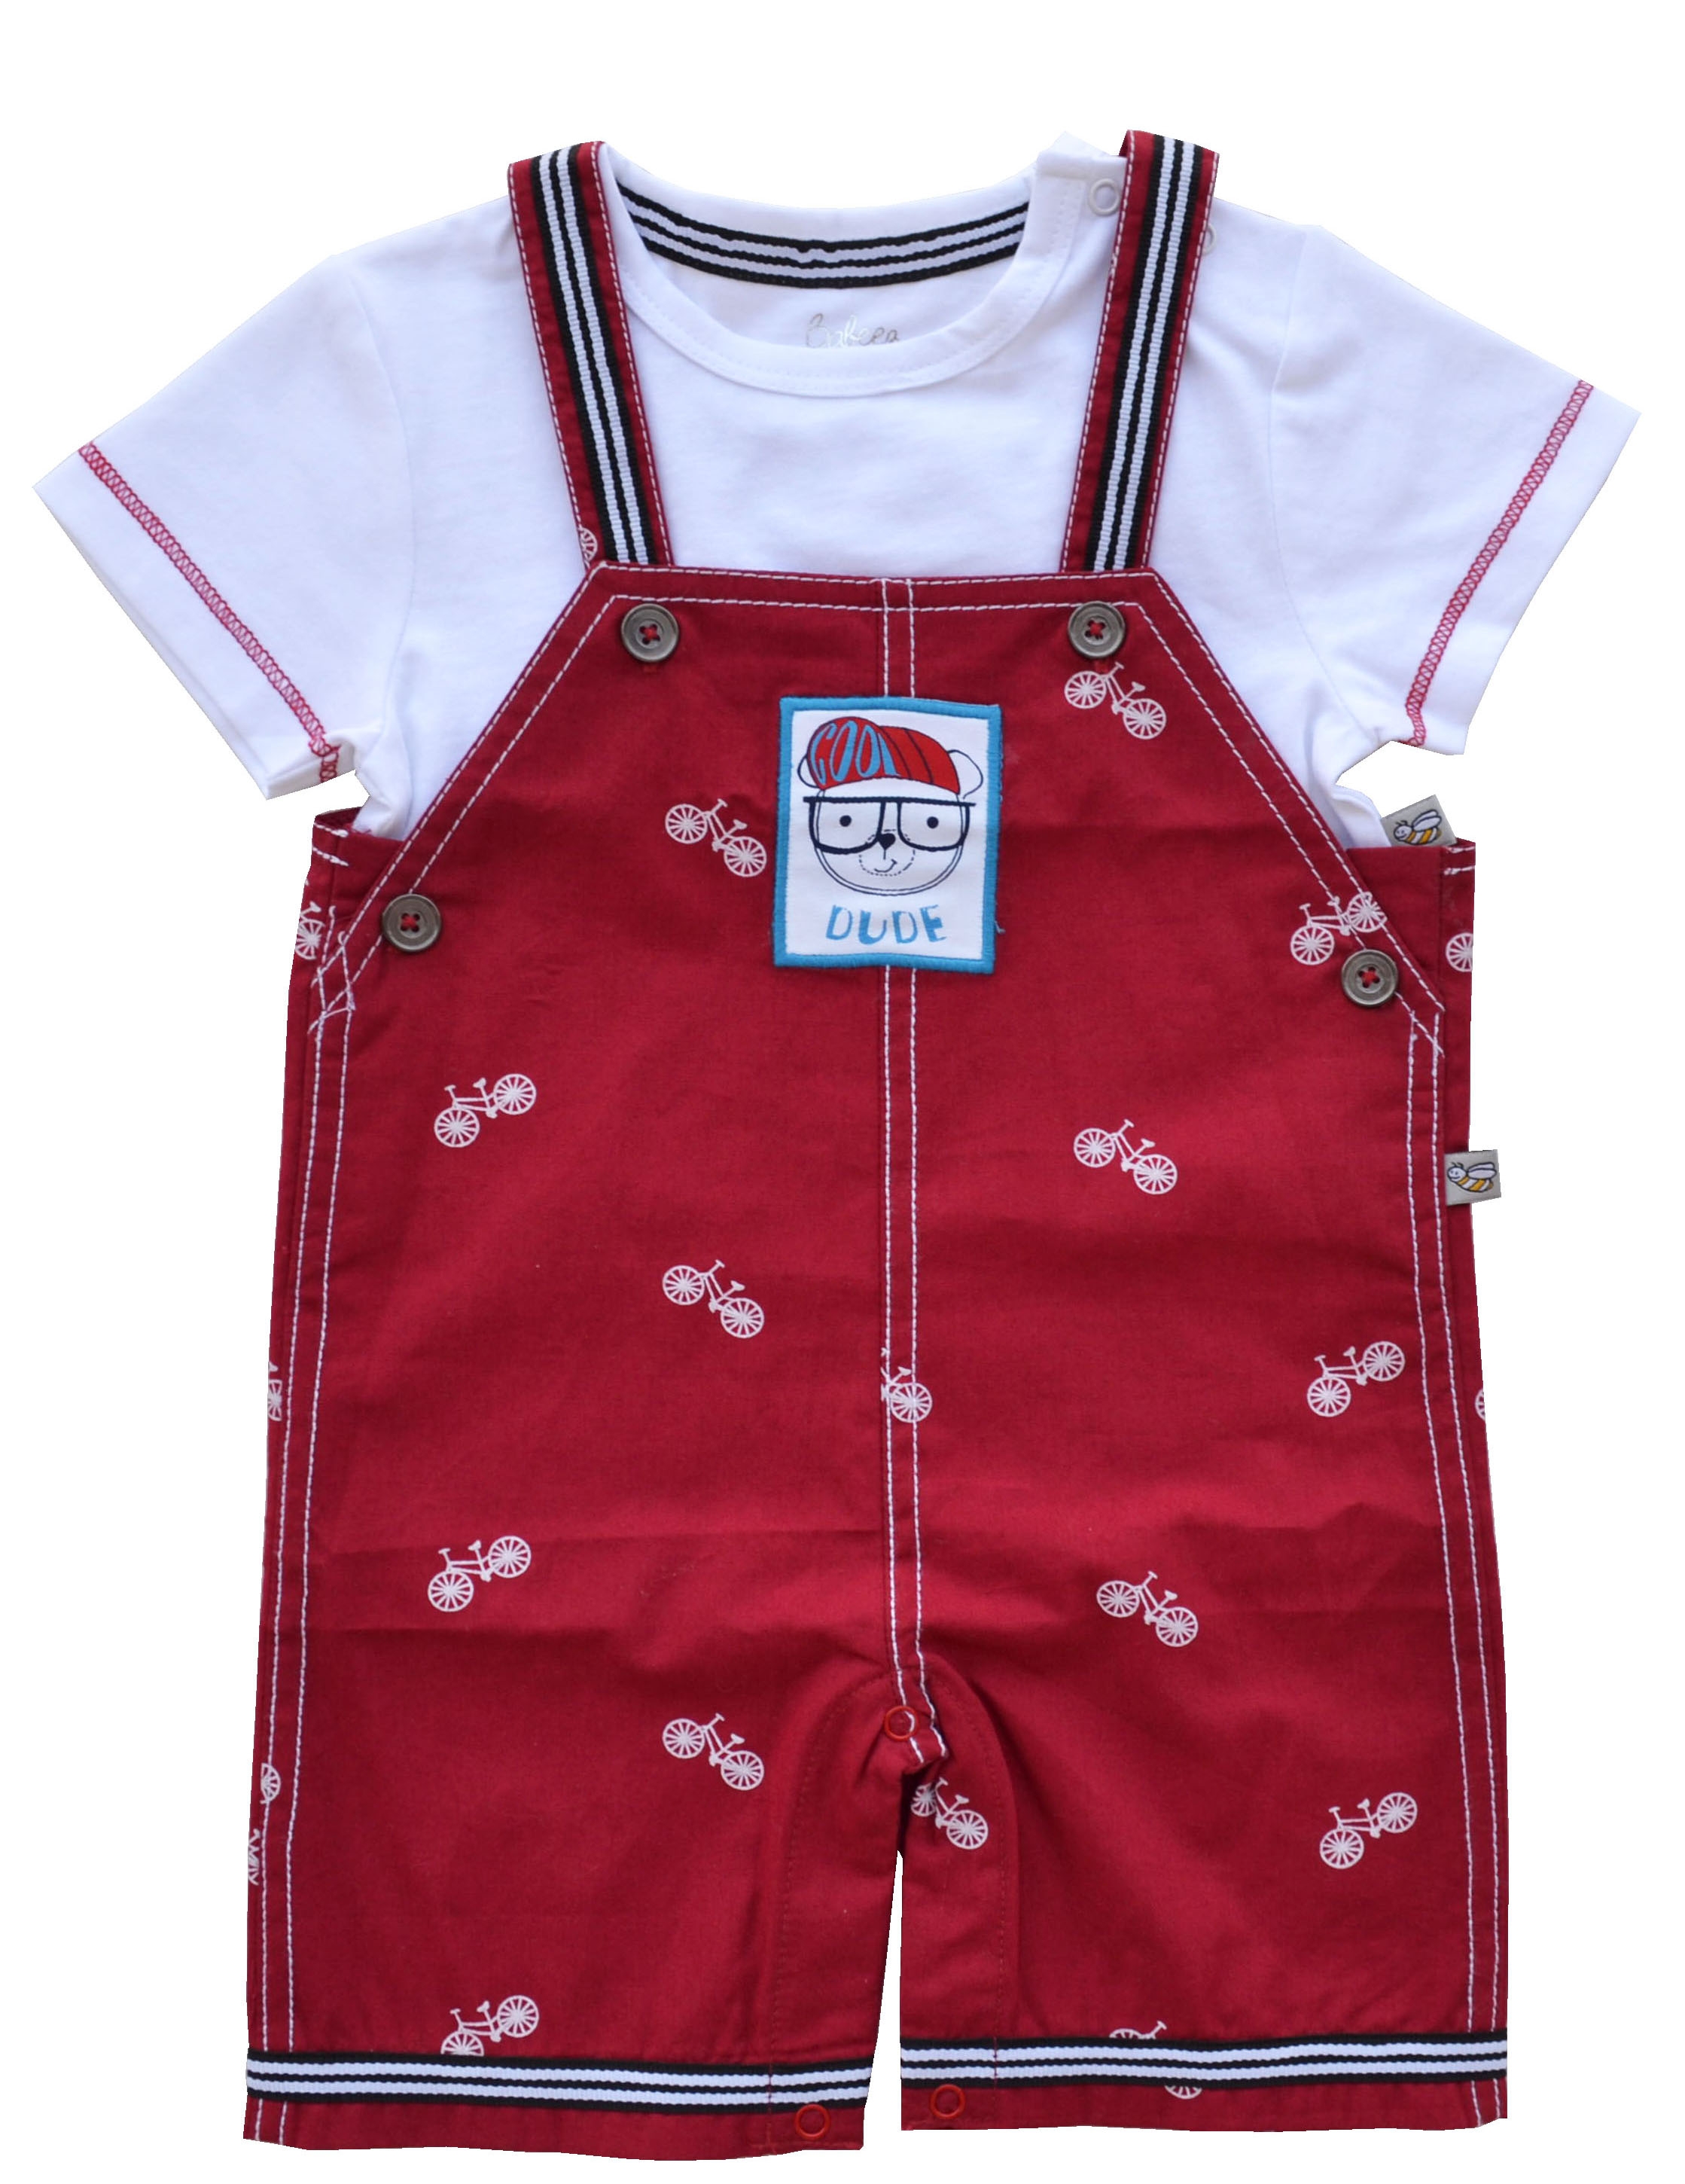 Babeez | White T-Shirt With Red Printed Romper Set (100% Cotton) undefined